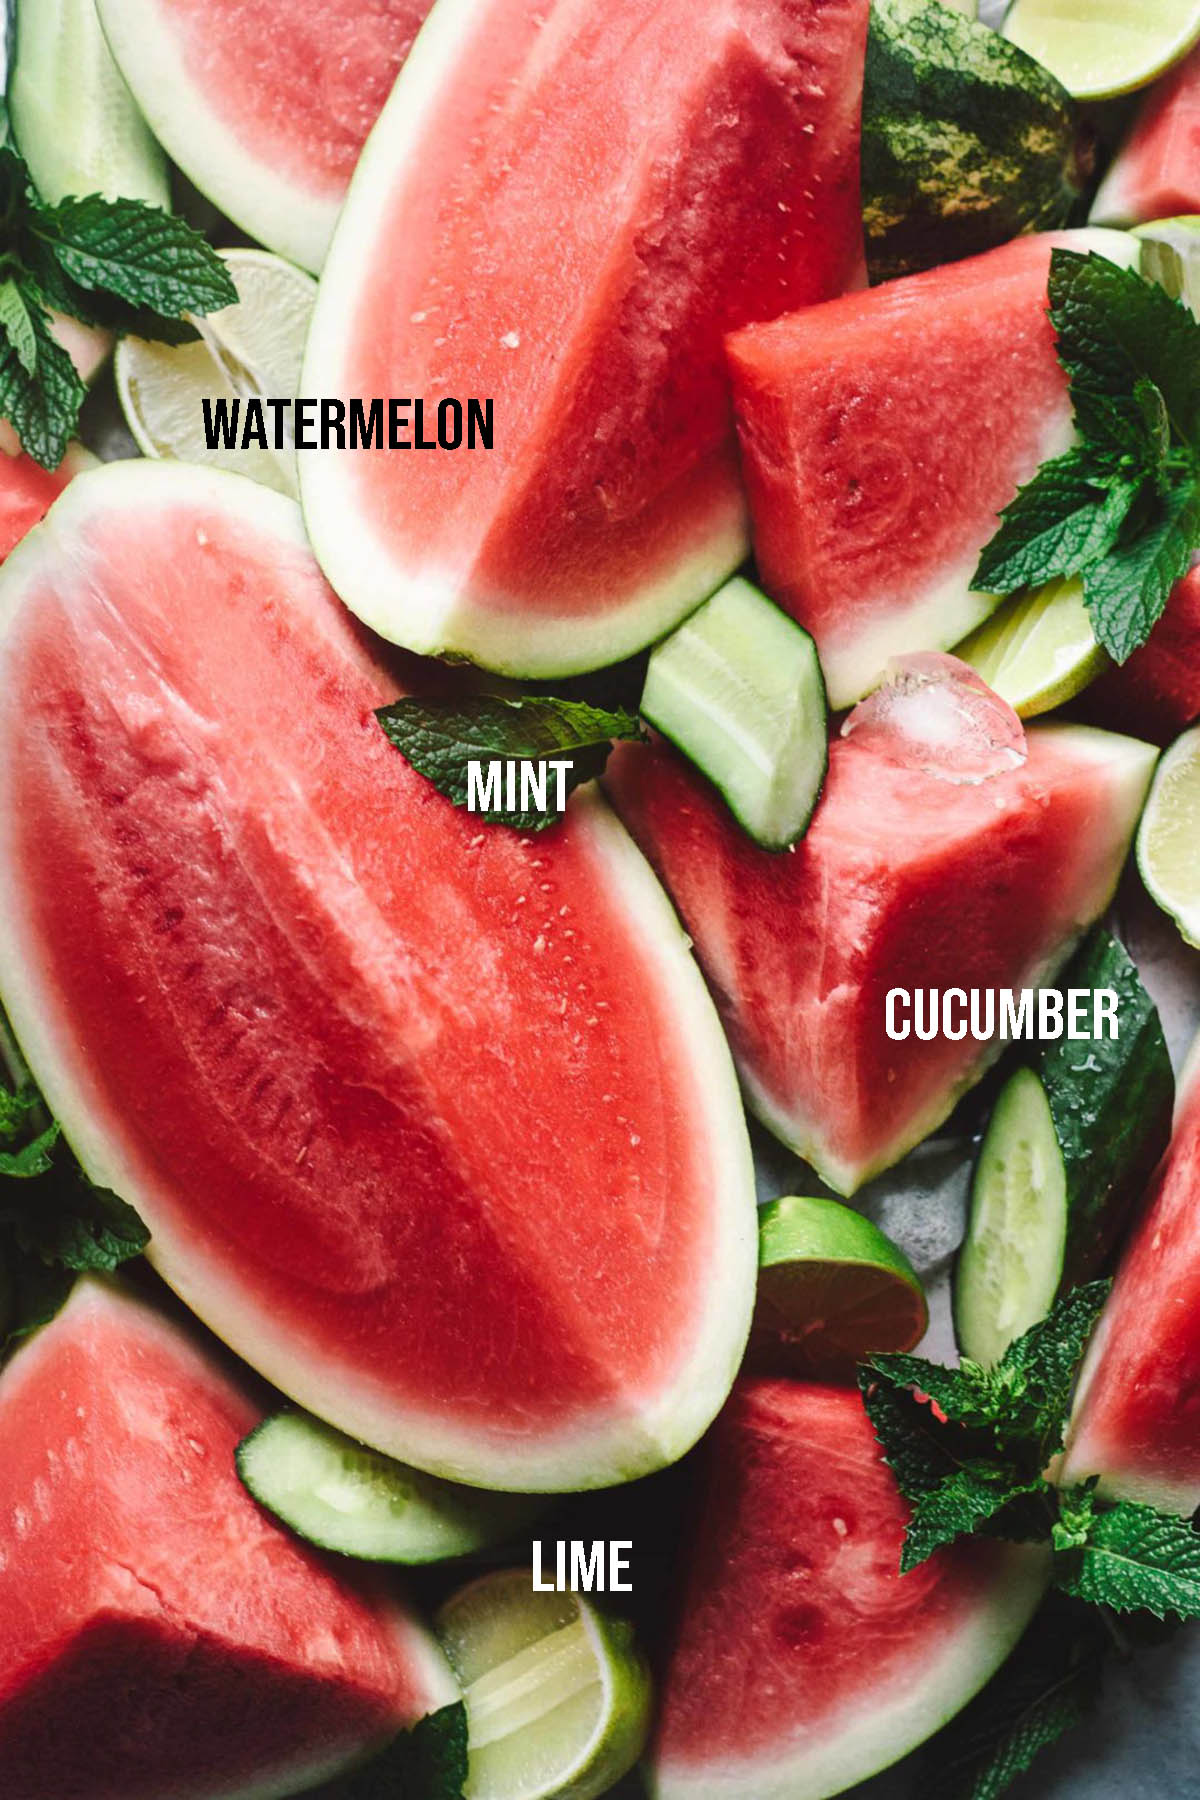 Watermelon limeade ingredients with labels.